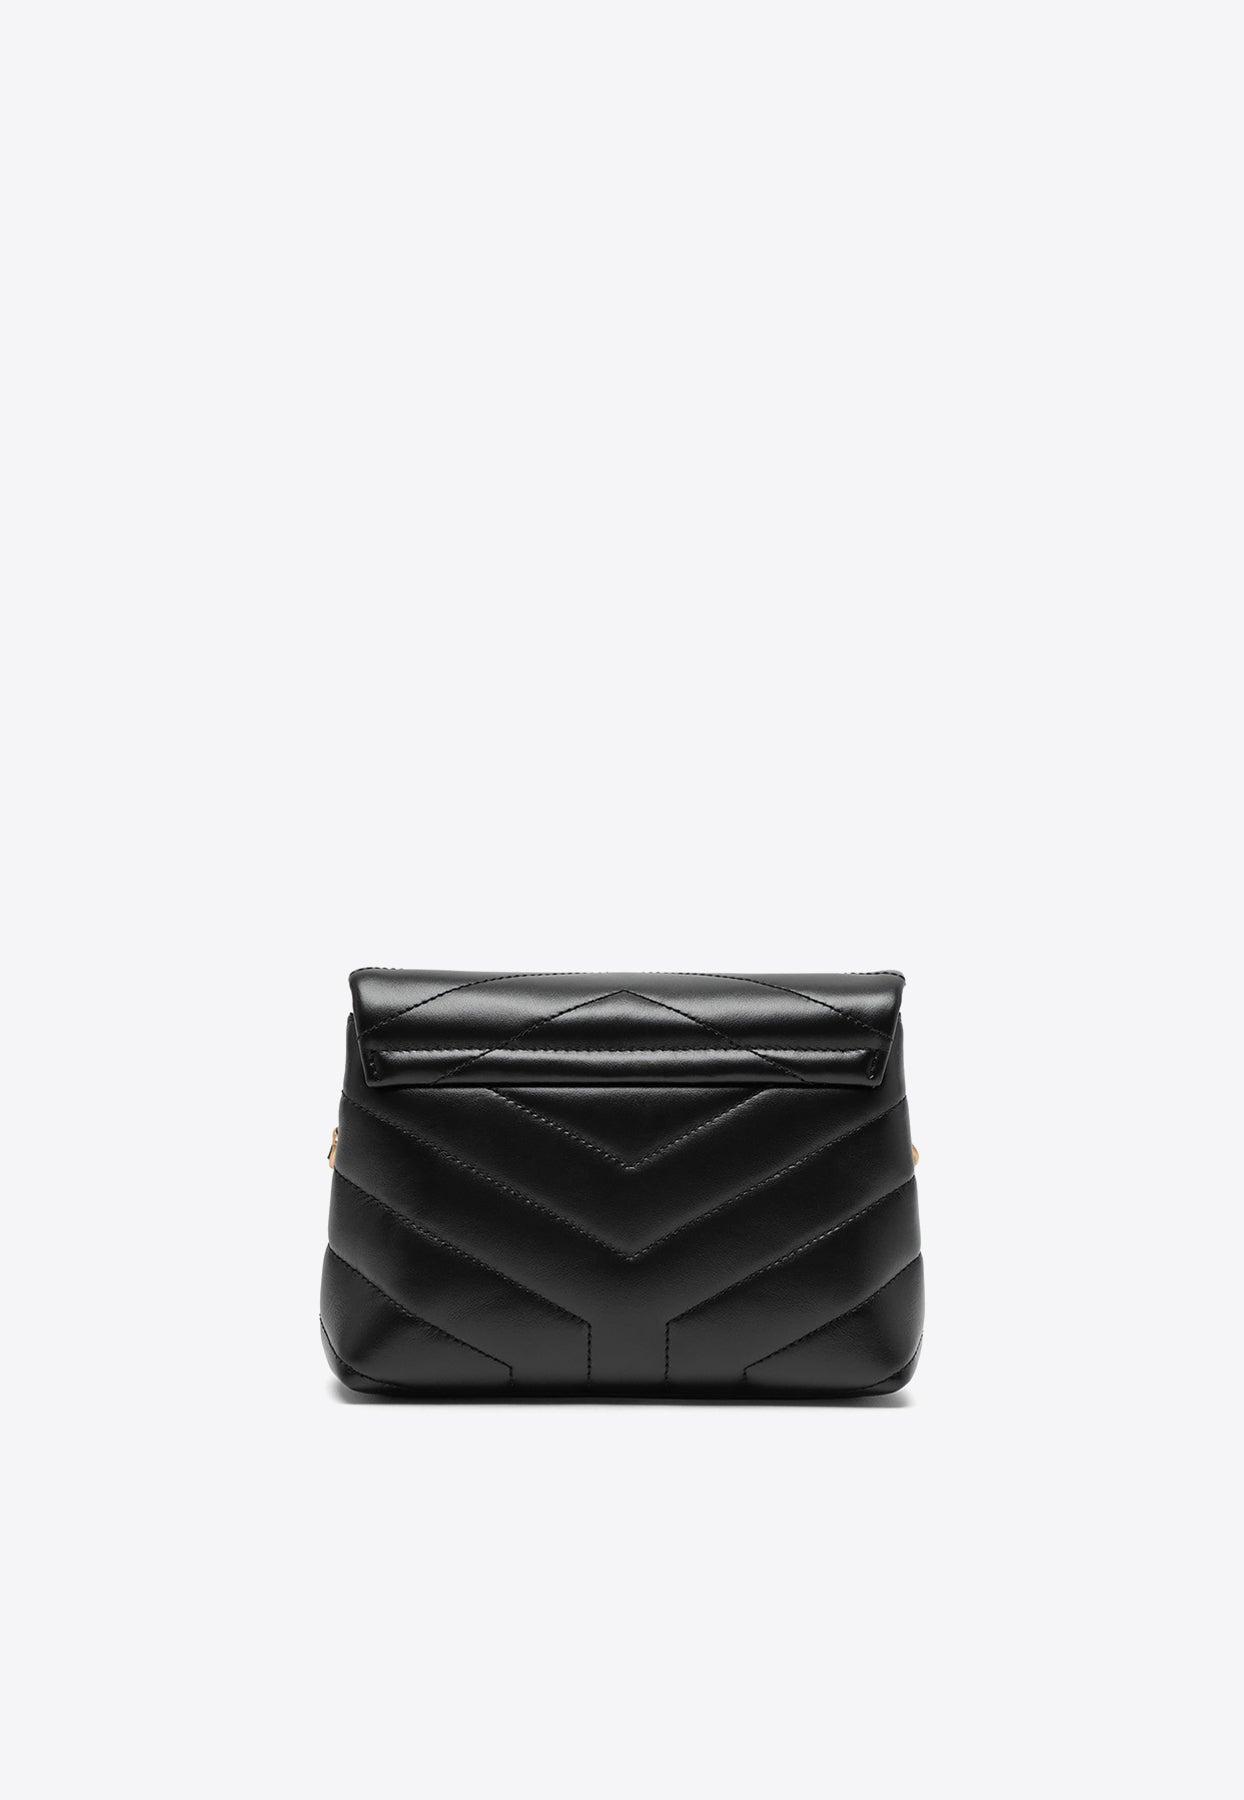 Saint Laurent Loulou Toy Bag in Quilted Leather